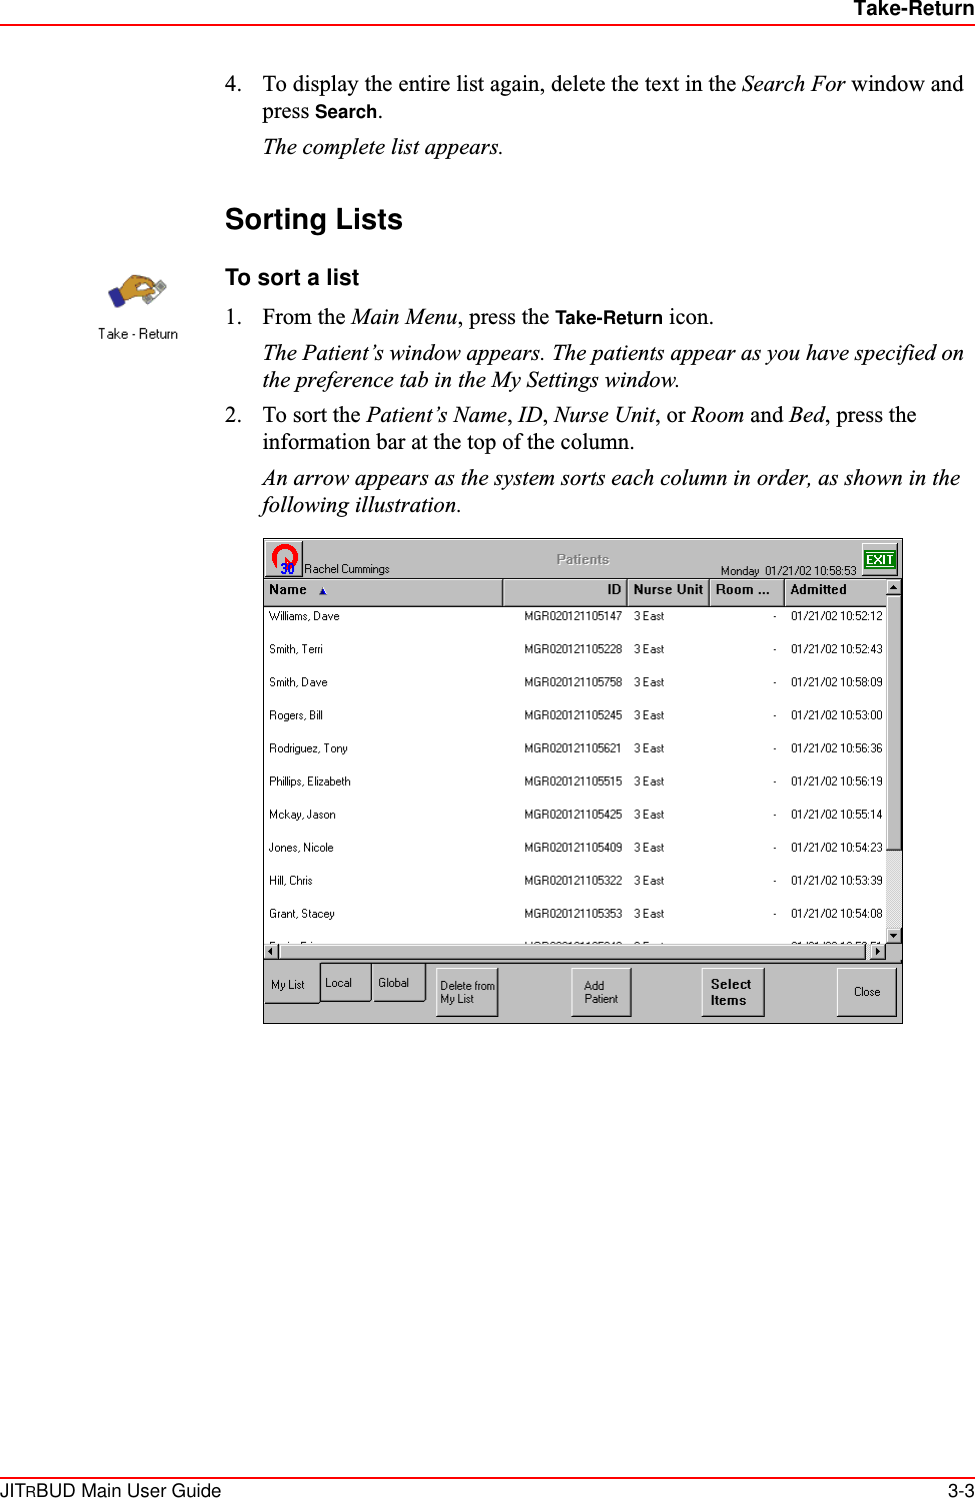 Take-ReturnJITRBUD Main User Guide 3-34. To display the entire list again, delete the text in the Search For window and press Search.The complete list appears.Sorting ListsTo sort a list1. From the Main Menu, press the Take-Return icon.The Patient’s window appears. The patients appear as you have specified on the preference tab in the My Settings window.2. To sort the Patient’s Name, ID, Nurse Unit, or Room and Bed, press the information bar at the top of the column. An arrow appears as the system sorts each column in order, as shown in the following illustration.